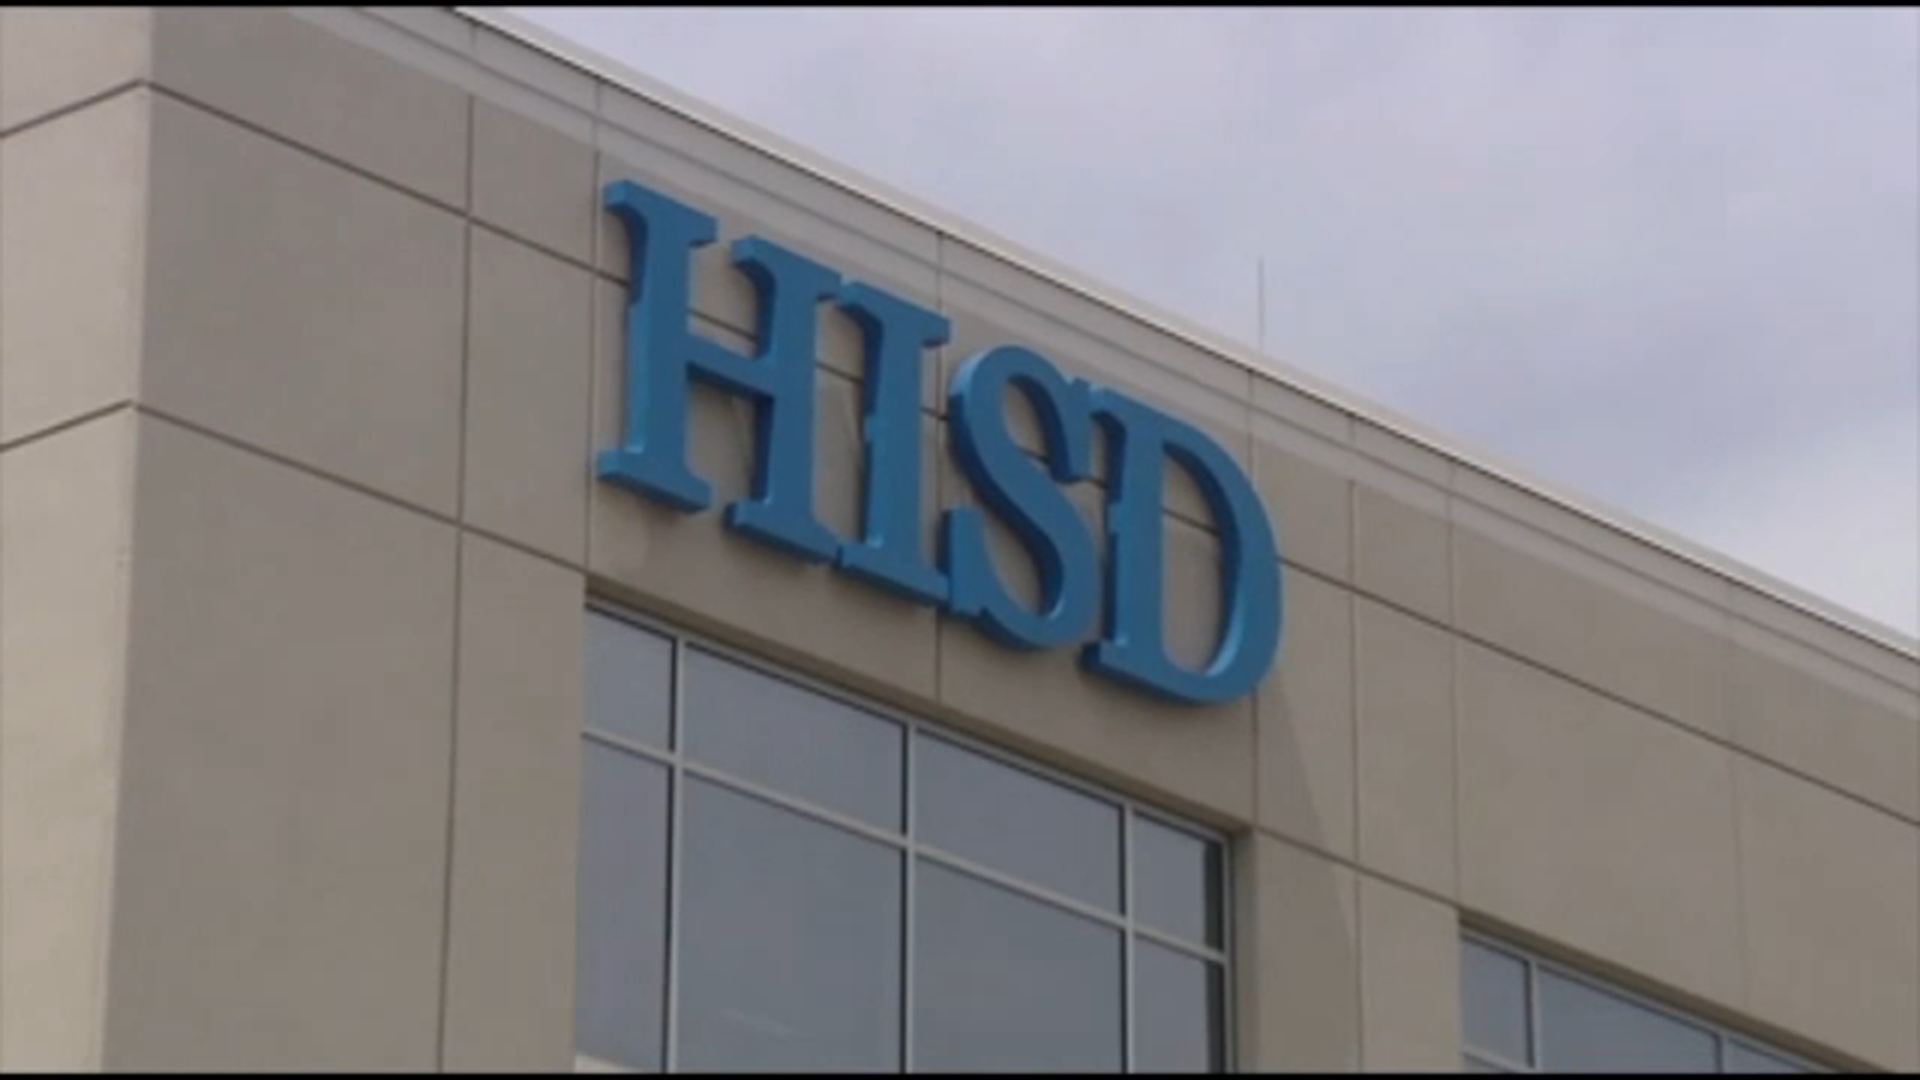 TEA takeover: Houston ISD drastically cuts New Education System